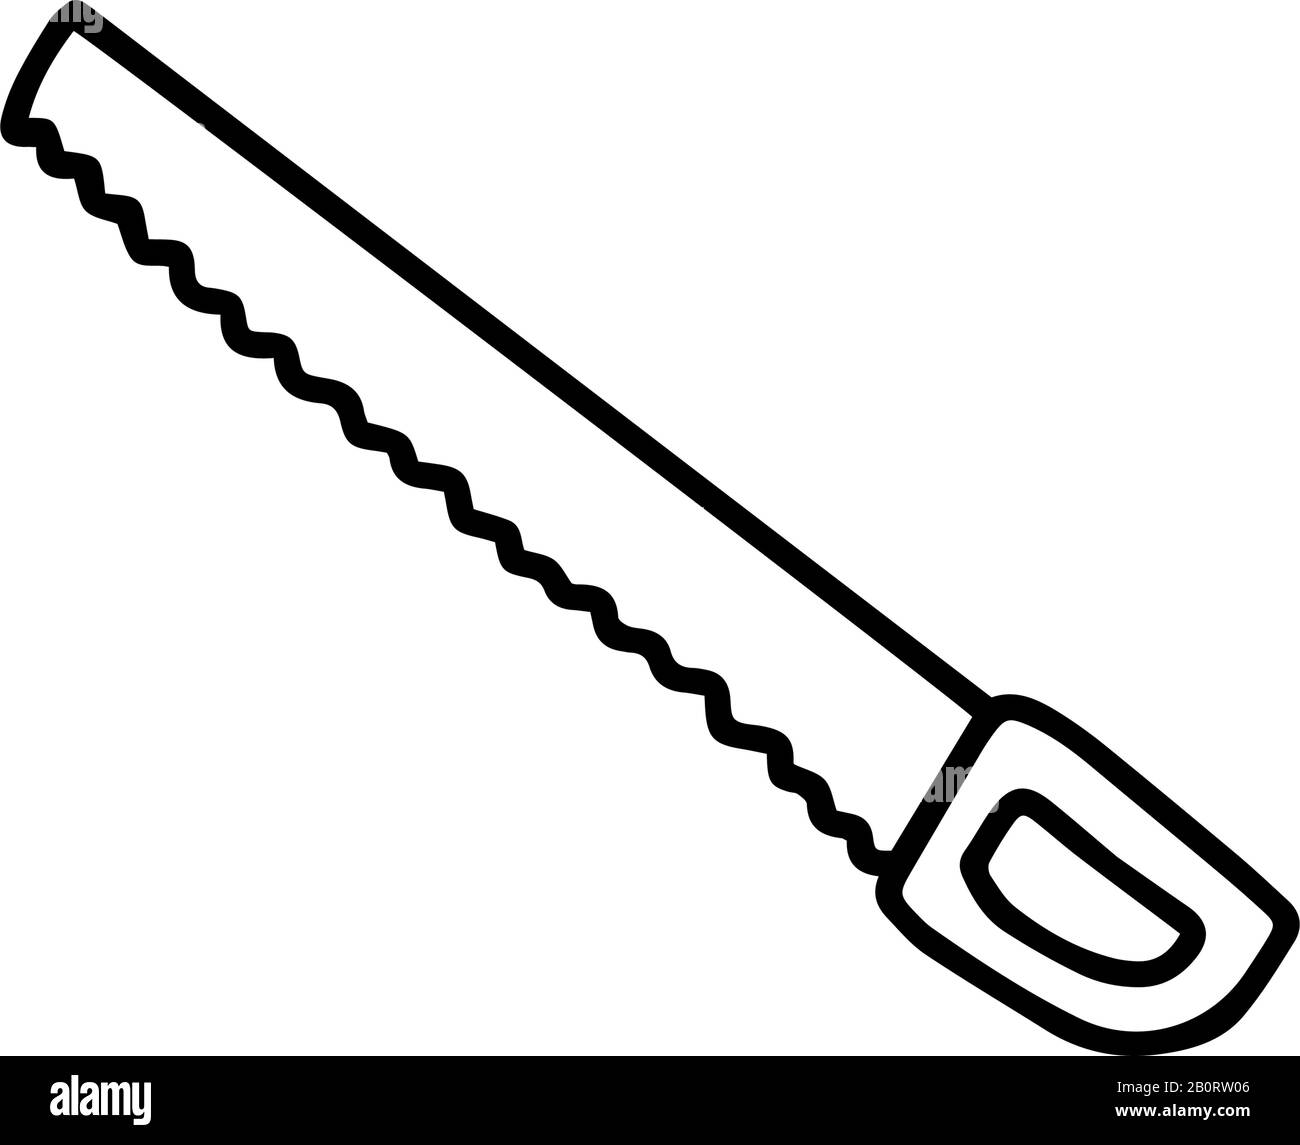 Hand outline saw. Large long metal file in hand drawn doodle style isolated on white background.Vector outline stock illustration.Sign Stock Vector